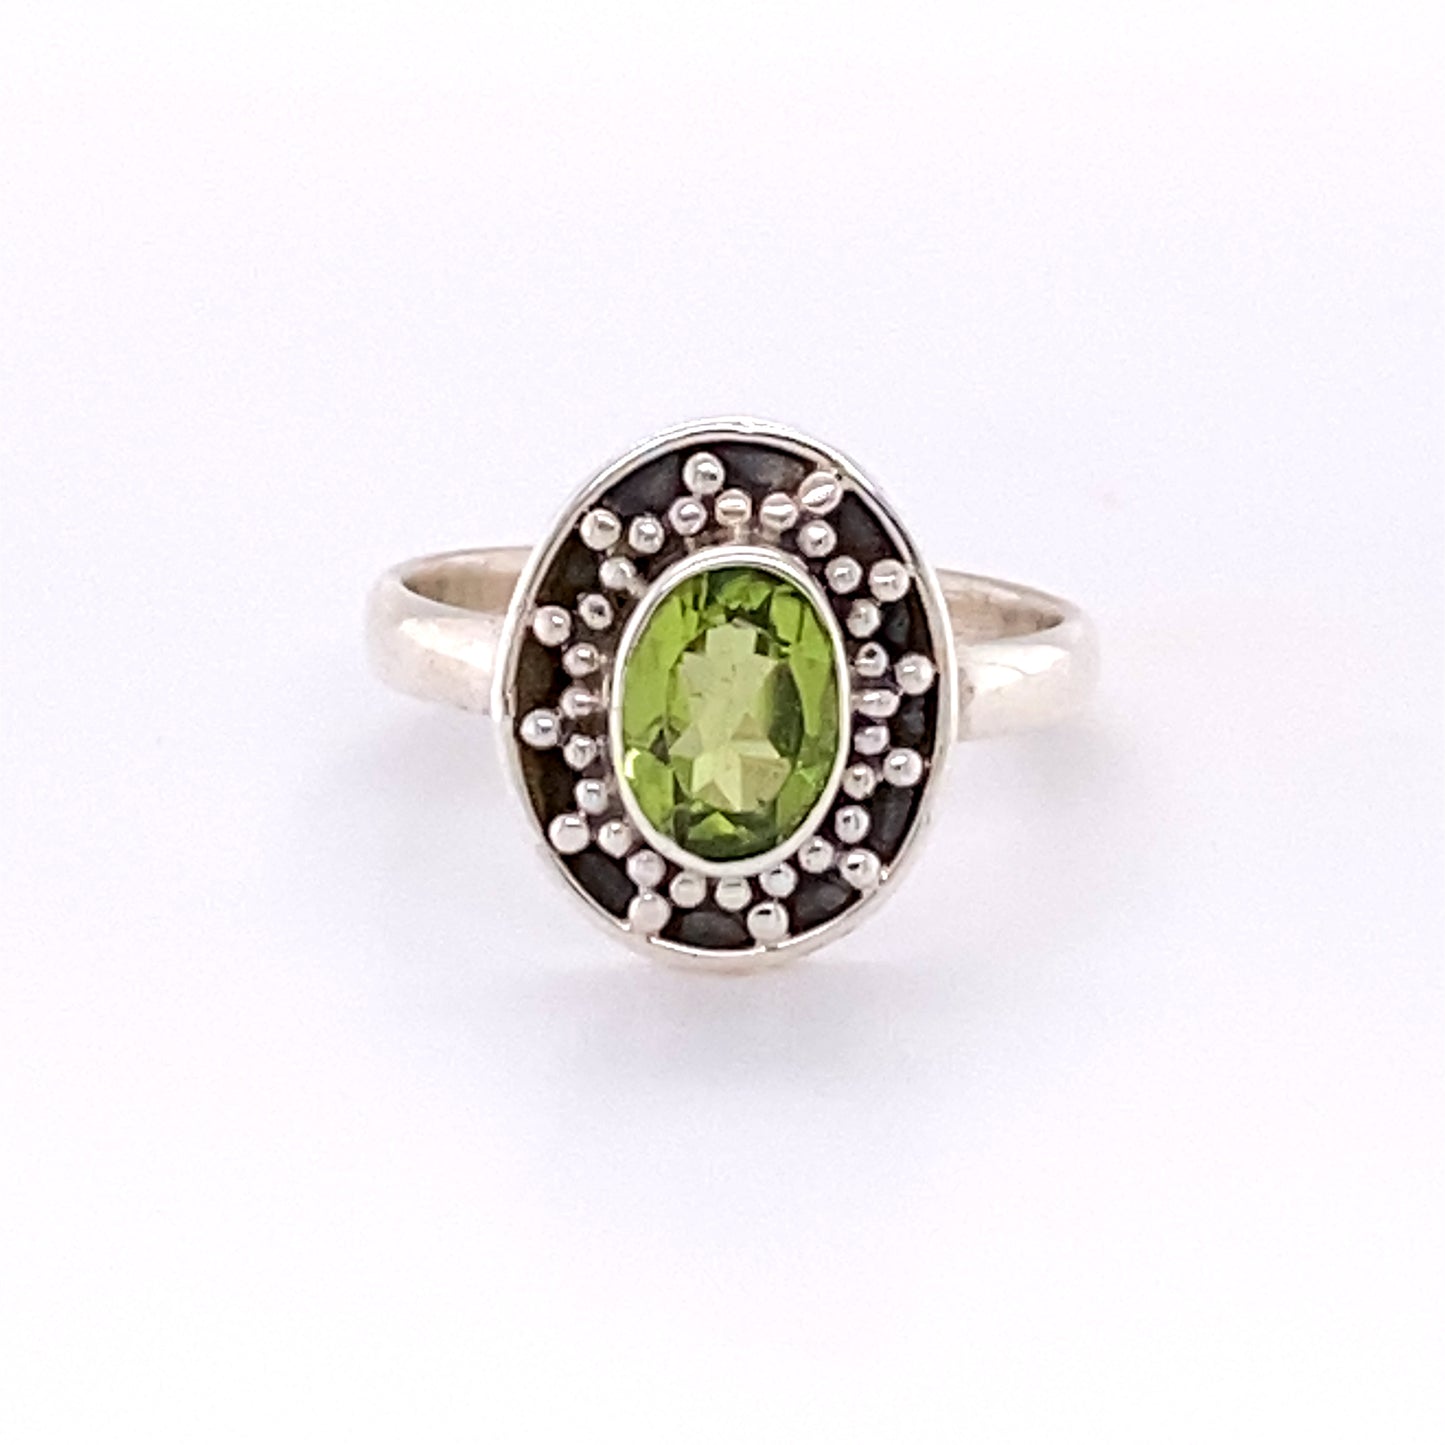 The Oval Peridot Dotted Shield Ring featuring an oval green gemstone surrounded by decorative Bali-styled disk setting and intricate silver beadwork.